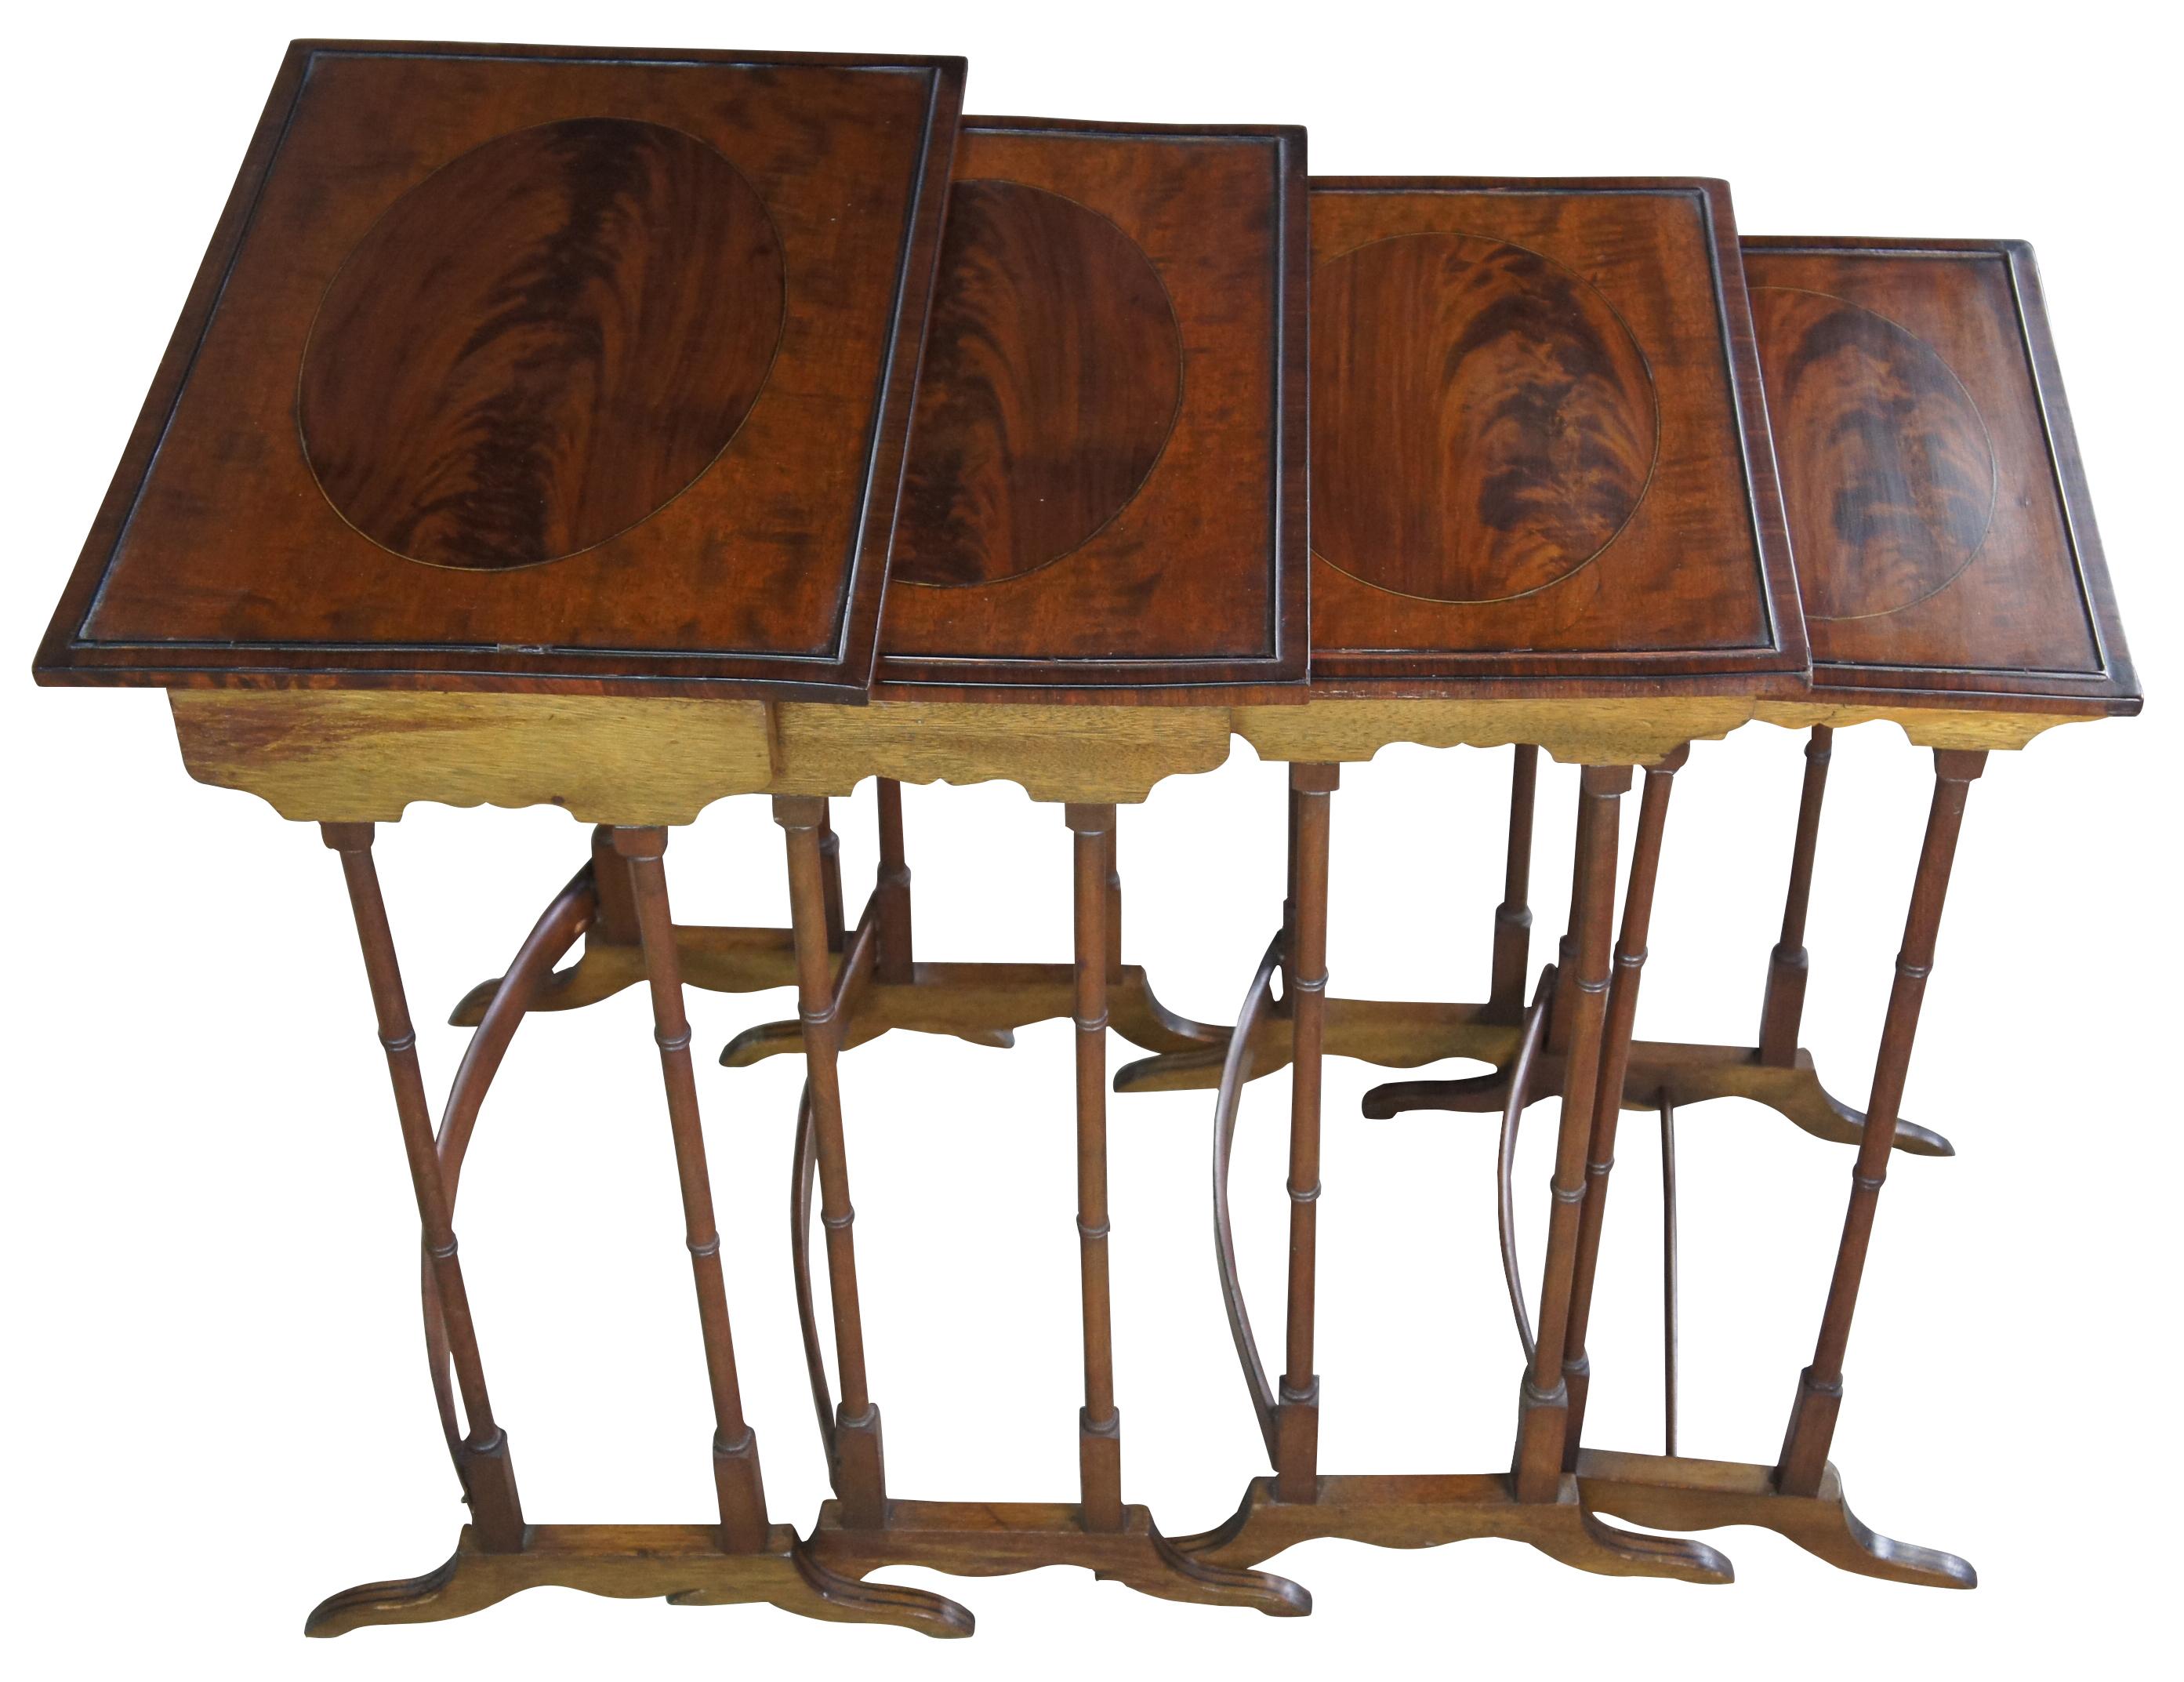 Nest of four antique Regency side or accent tables. Made of flamed mahogany featuring rectangular form with inlaid oval top, bamboo style legs, bentwood stretcher and serpentine feet.

Measures: largest 13.75